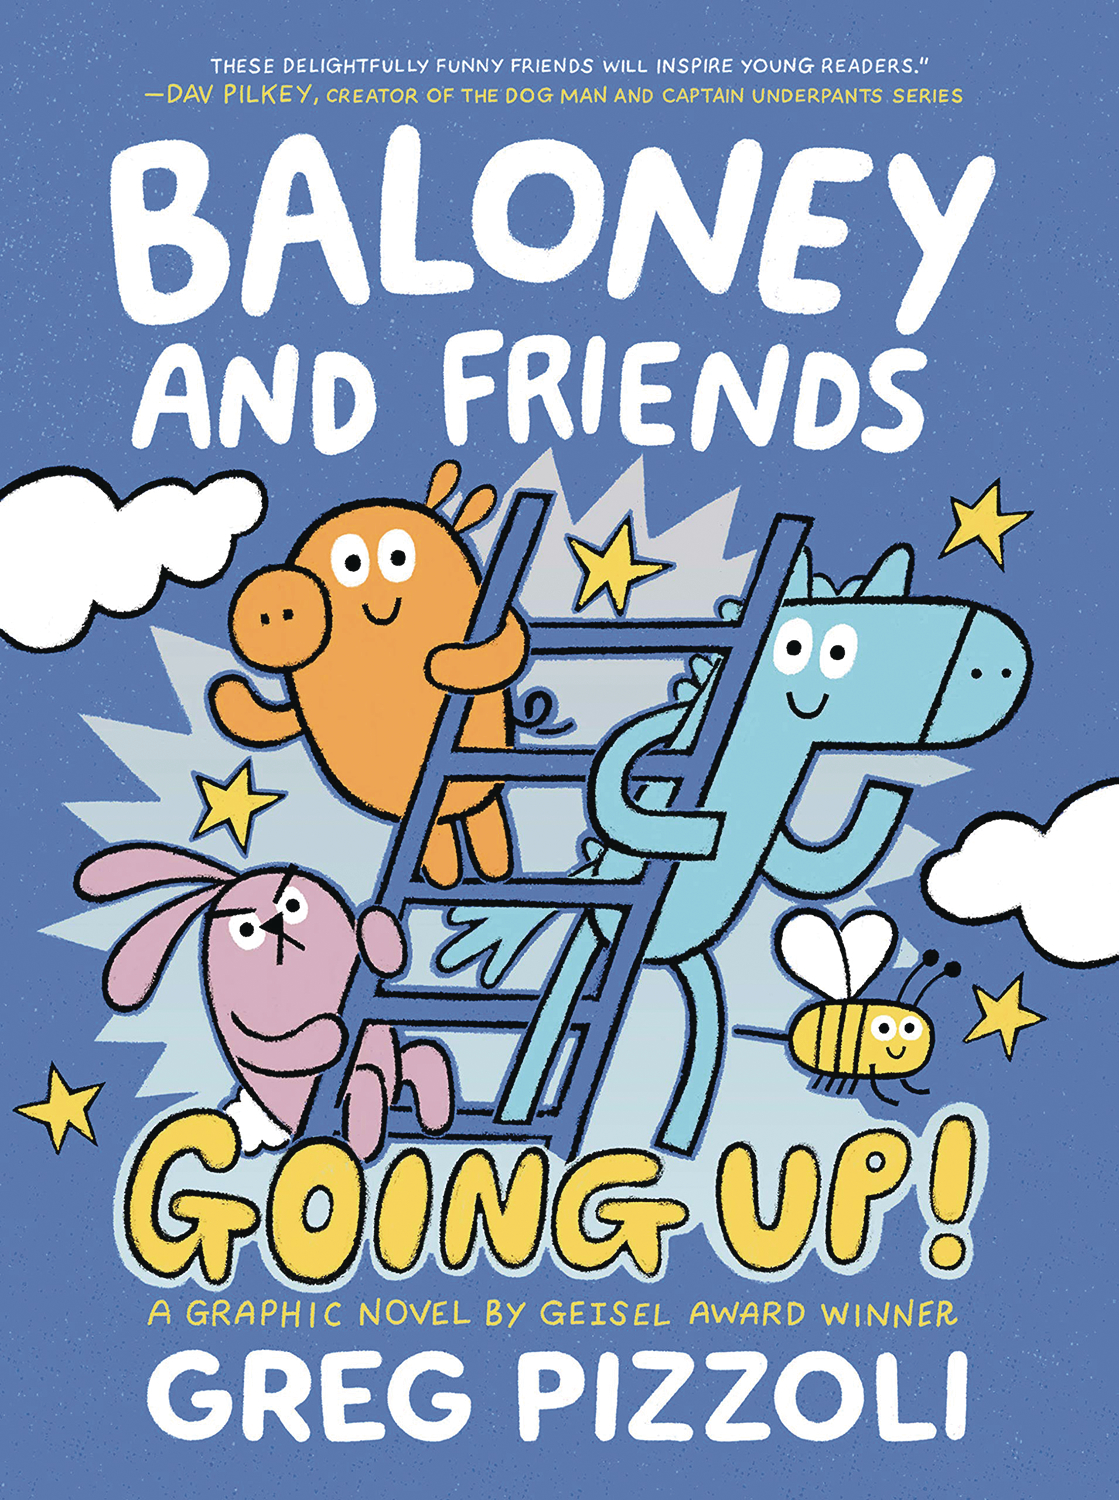 Baloney & Friends Graphic Novel #2 Going Up